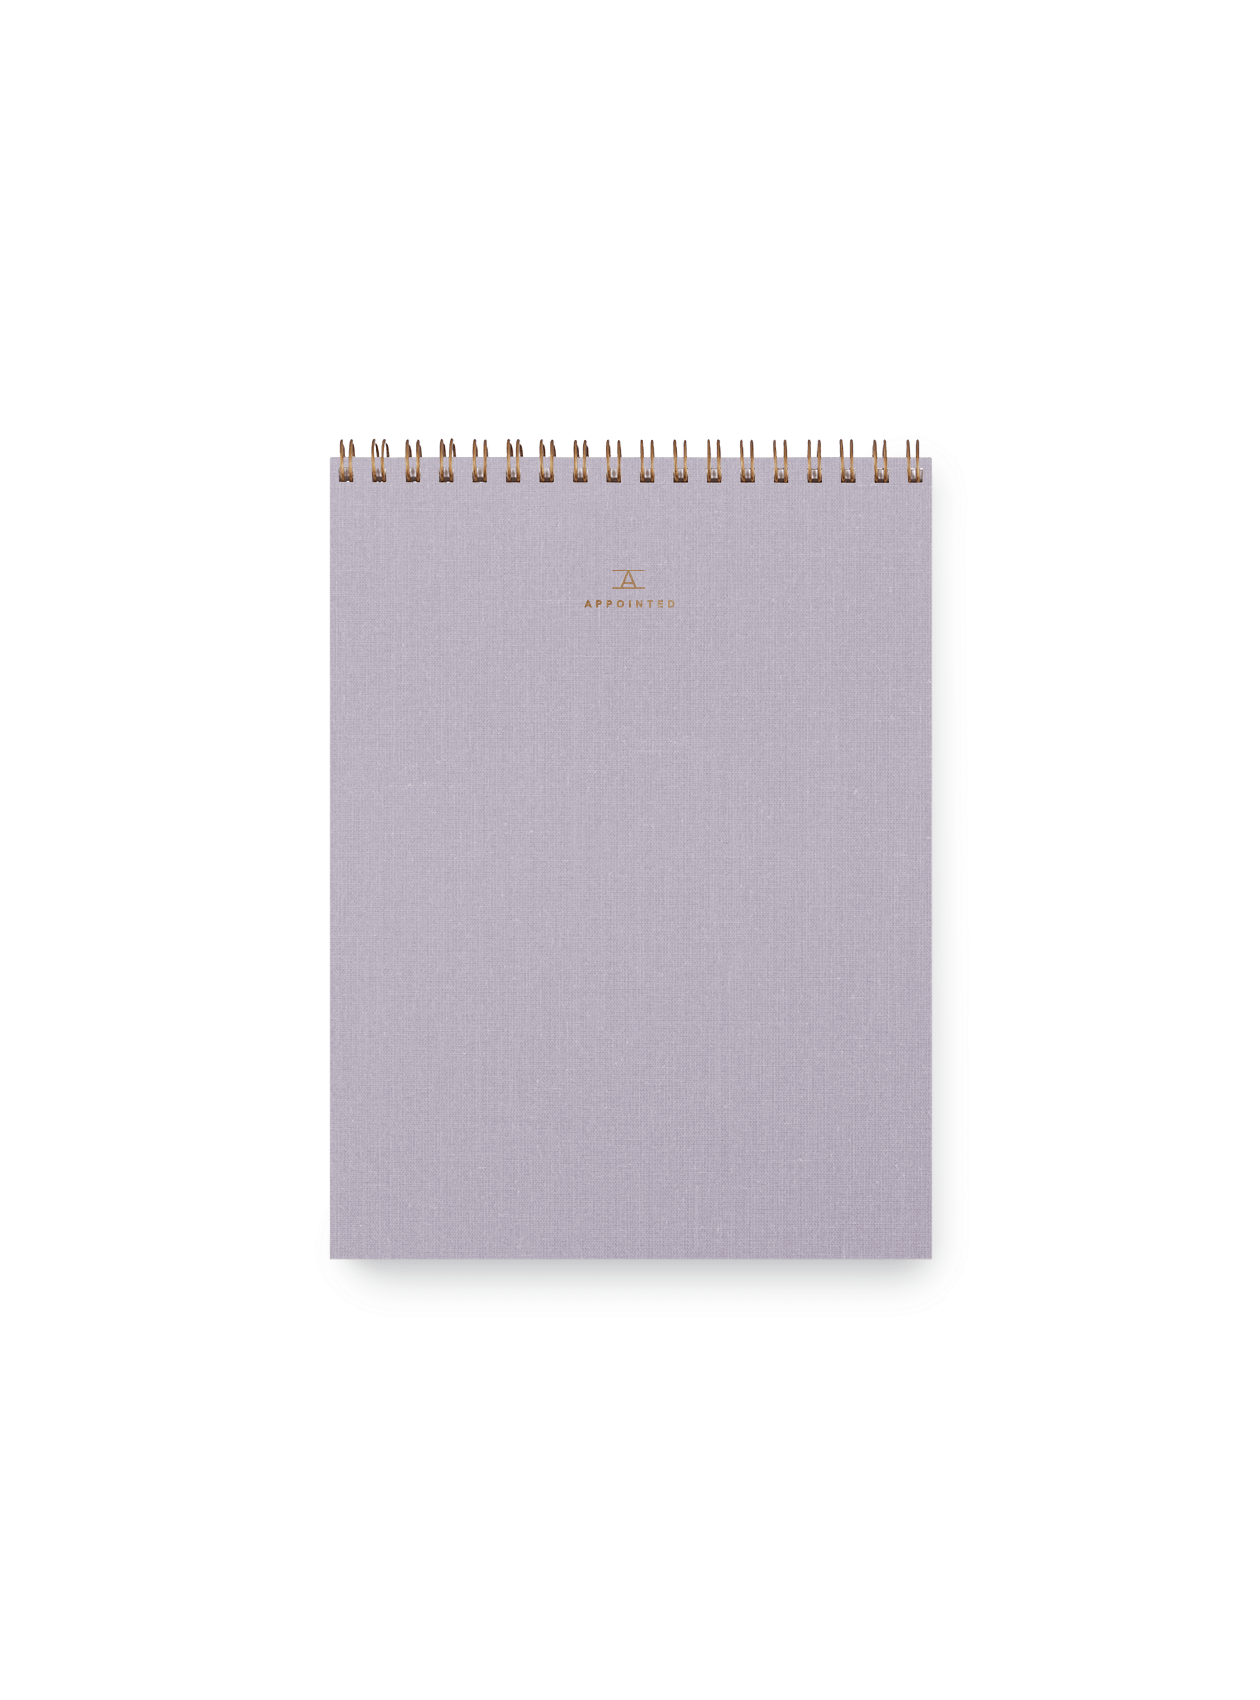 Appointed Office Notepad with gold foil details, bookcloth cover, and brass wire-o binding || Lavender Gray